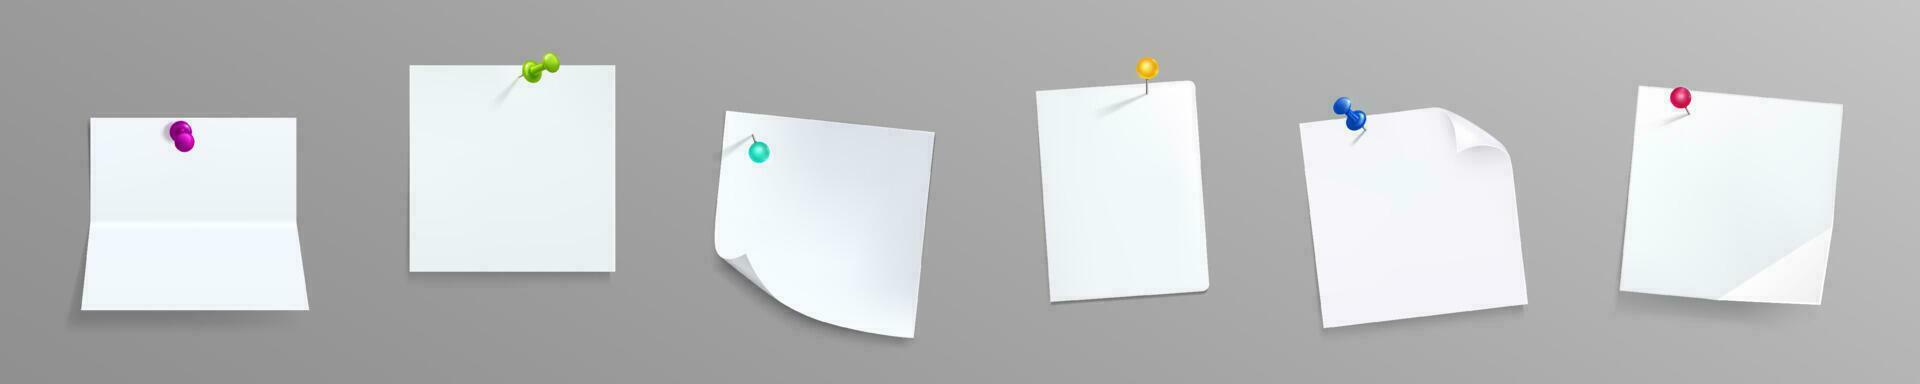 Paper notes with pins, white stickers or notepad vector